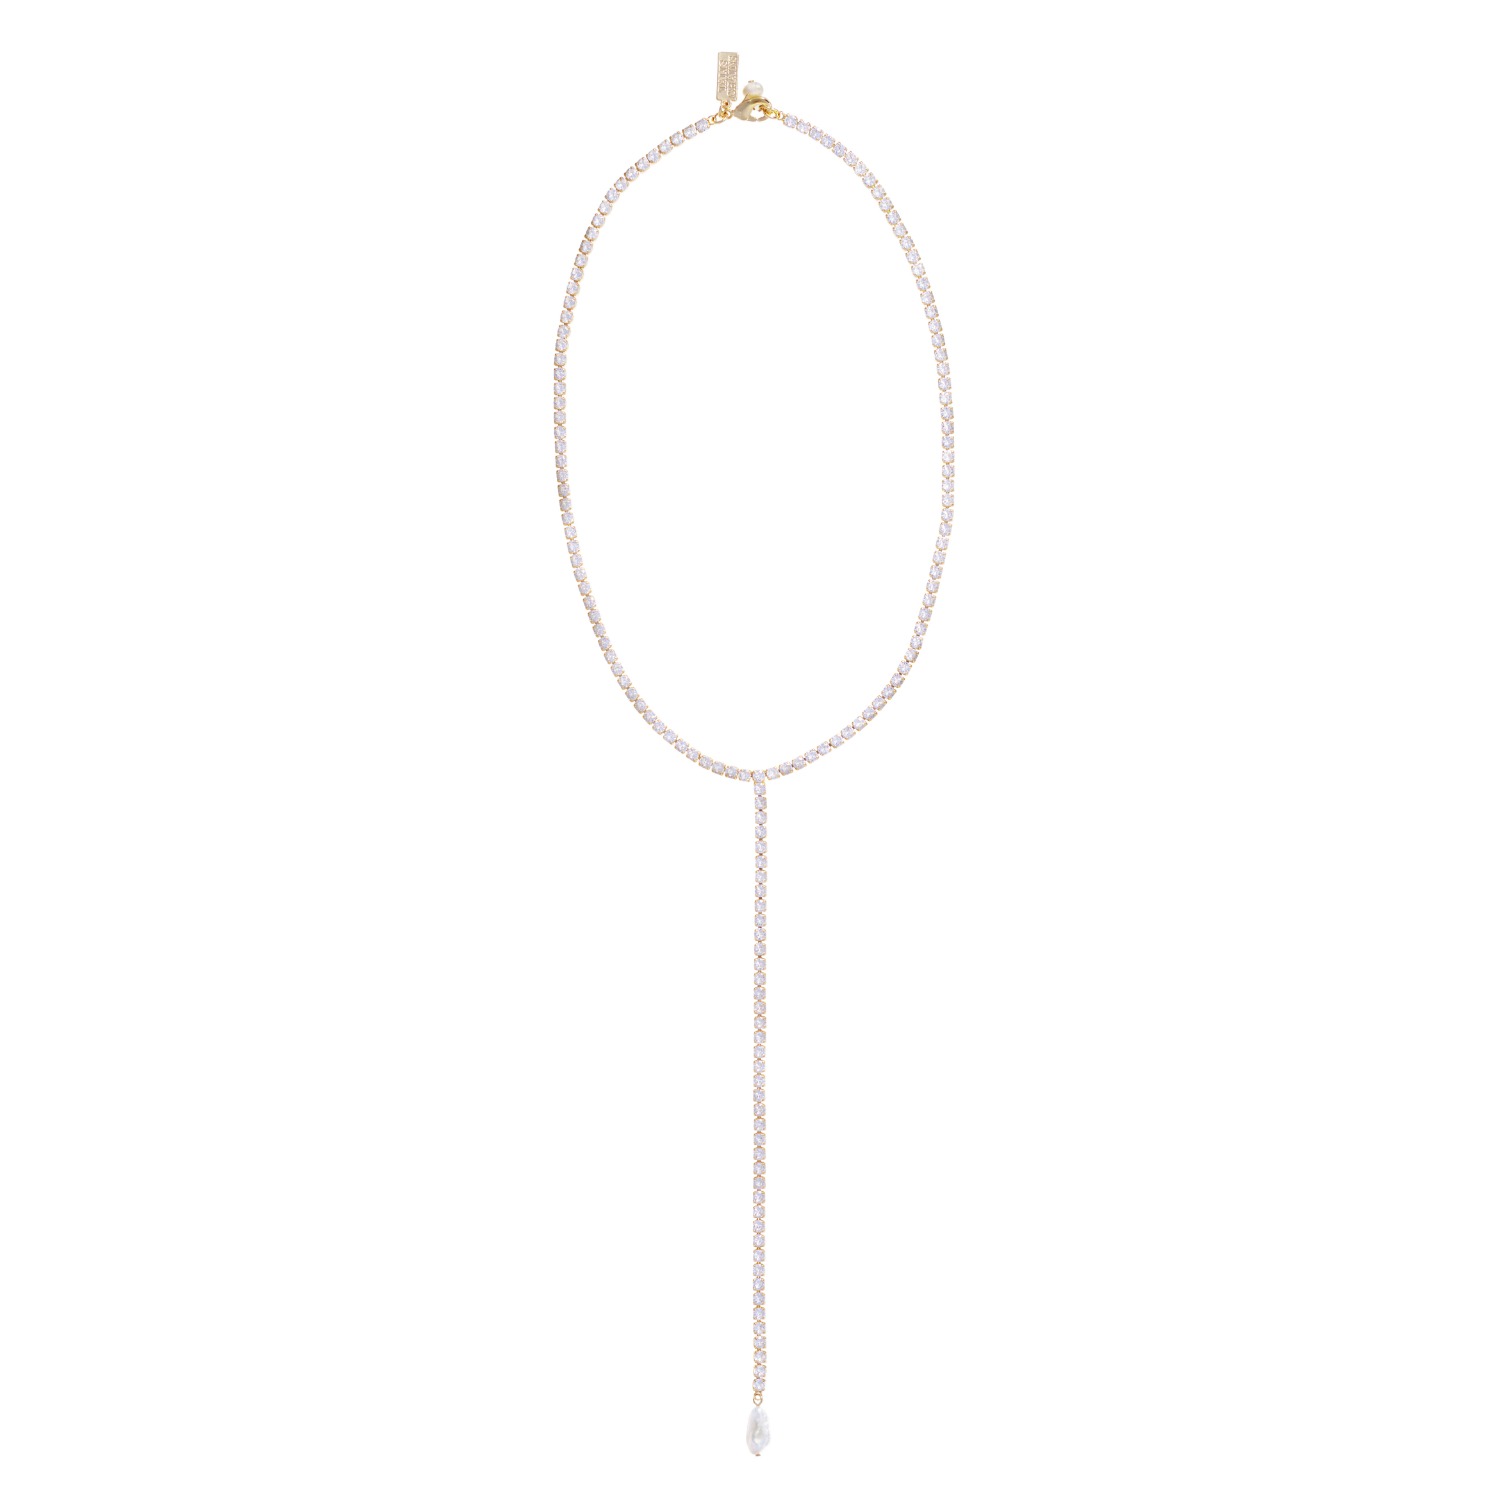 Women’s Gold / White Lariat Necklace Square Talis Chains